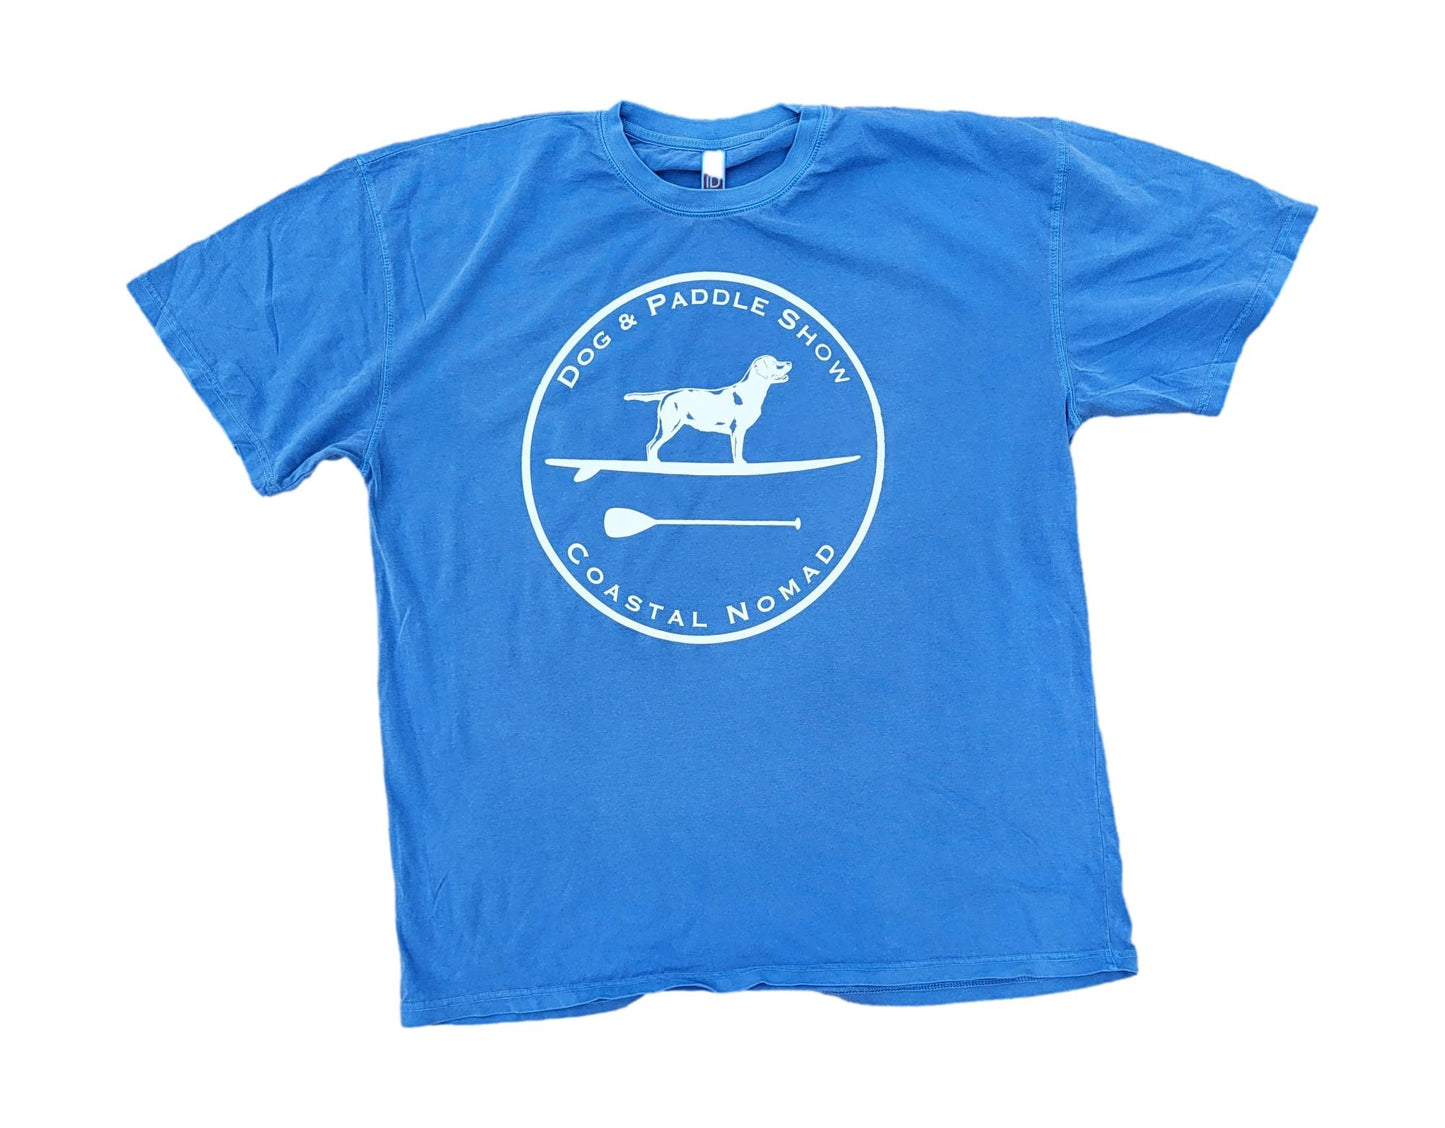 Dog and Paddle Show t-shirt